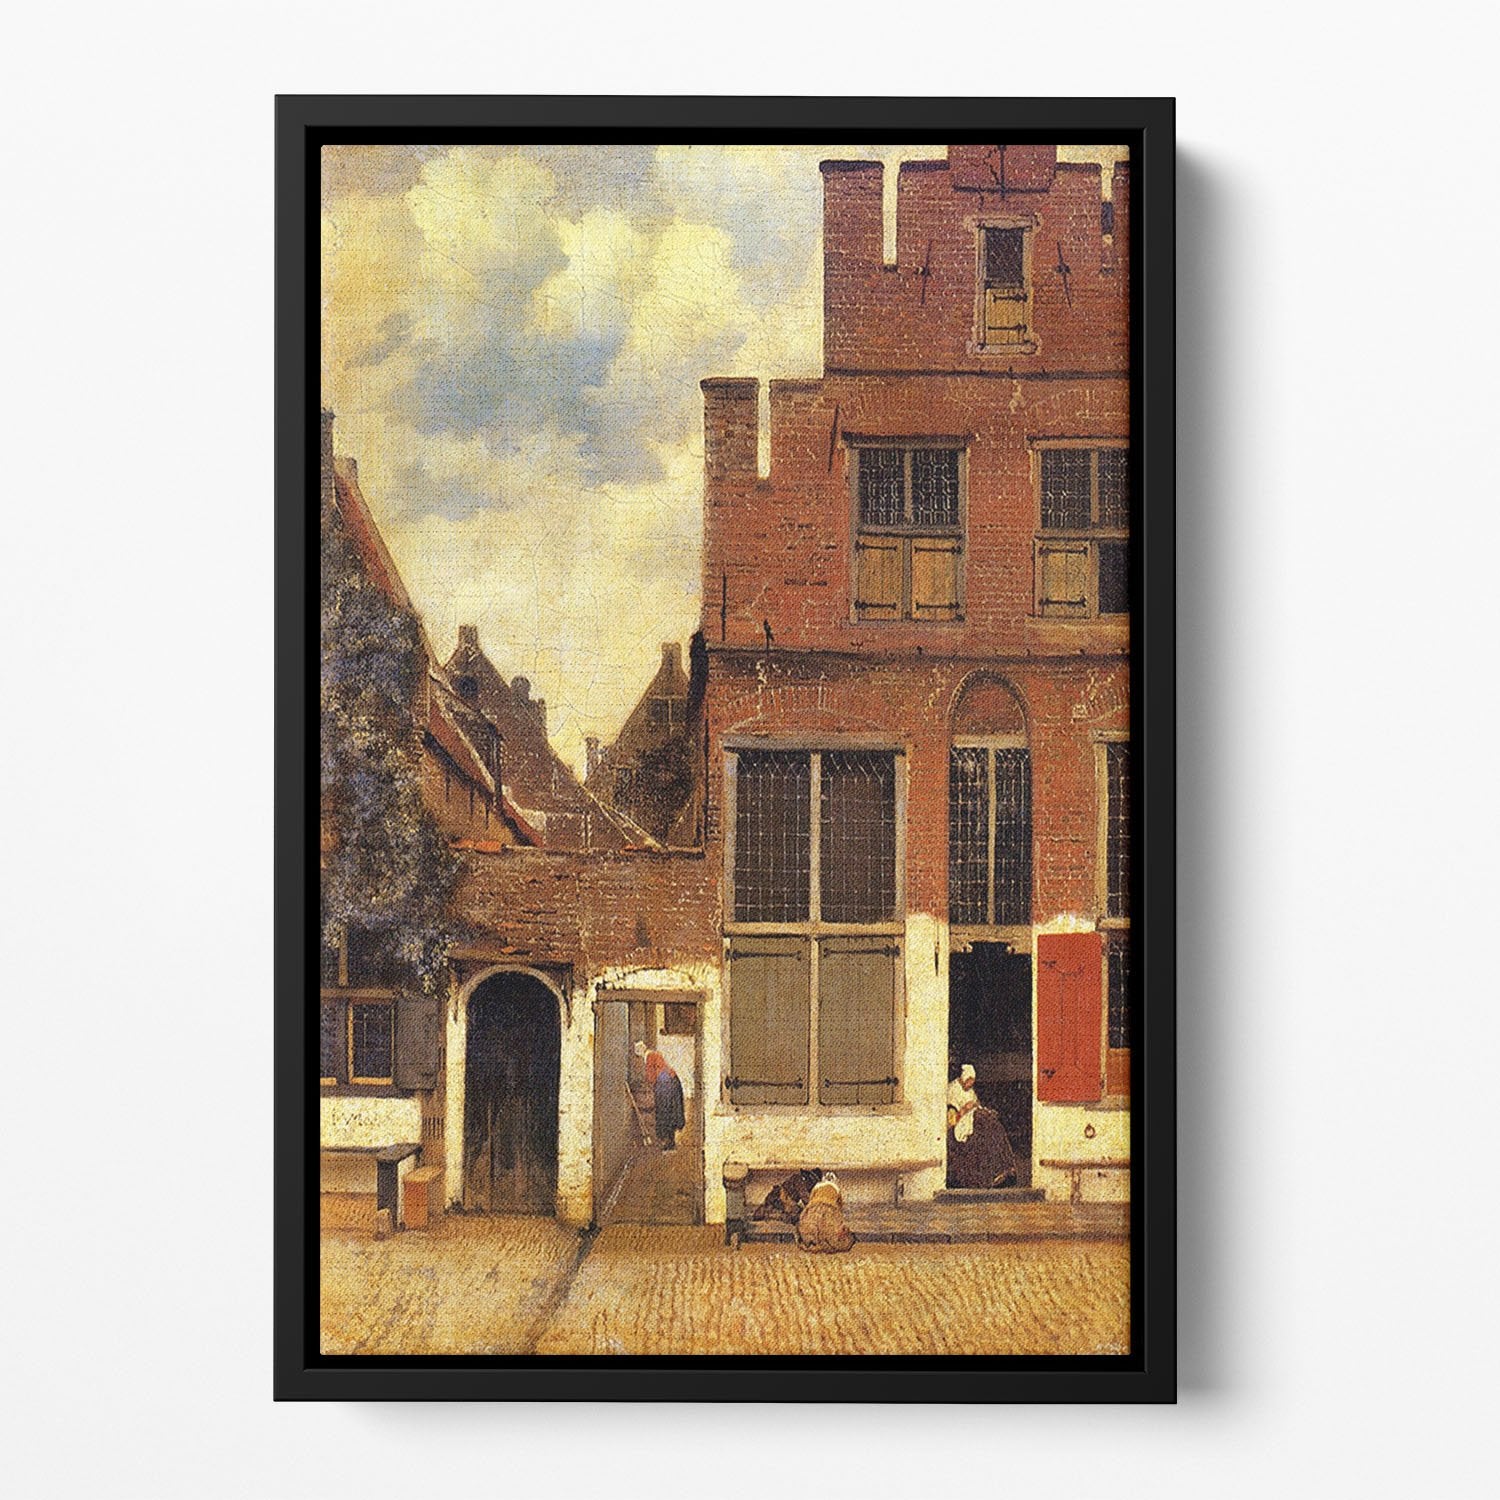 The little street by Vermeer Floating Framed Canvas